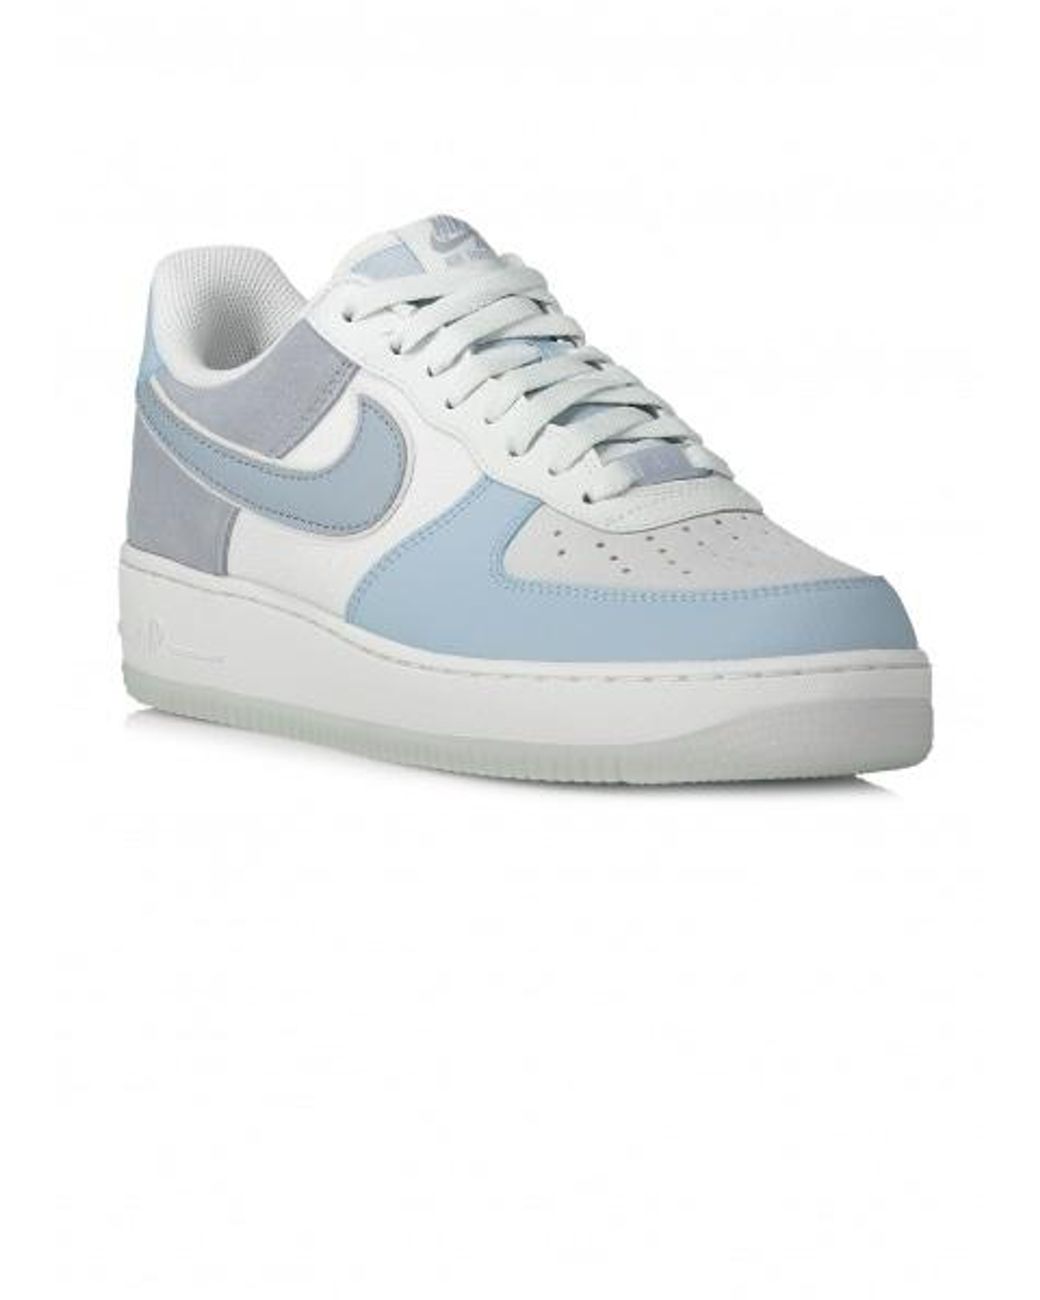 air force 1 07 trainers armory blue obsidian mist off white